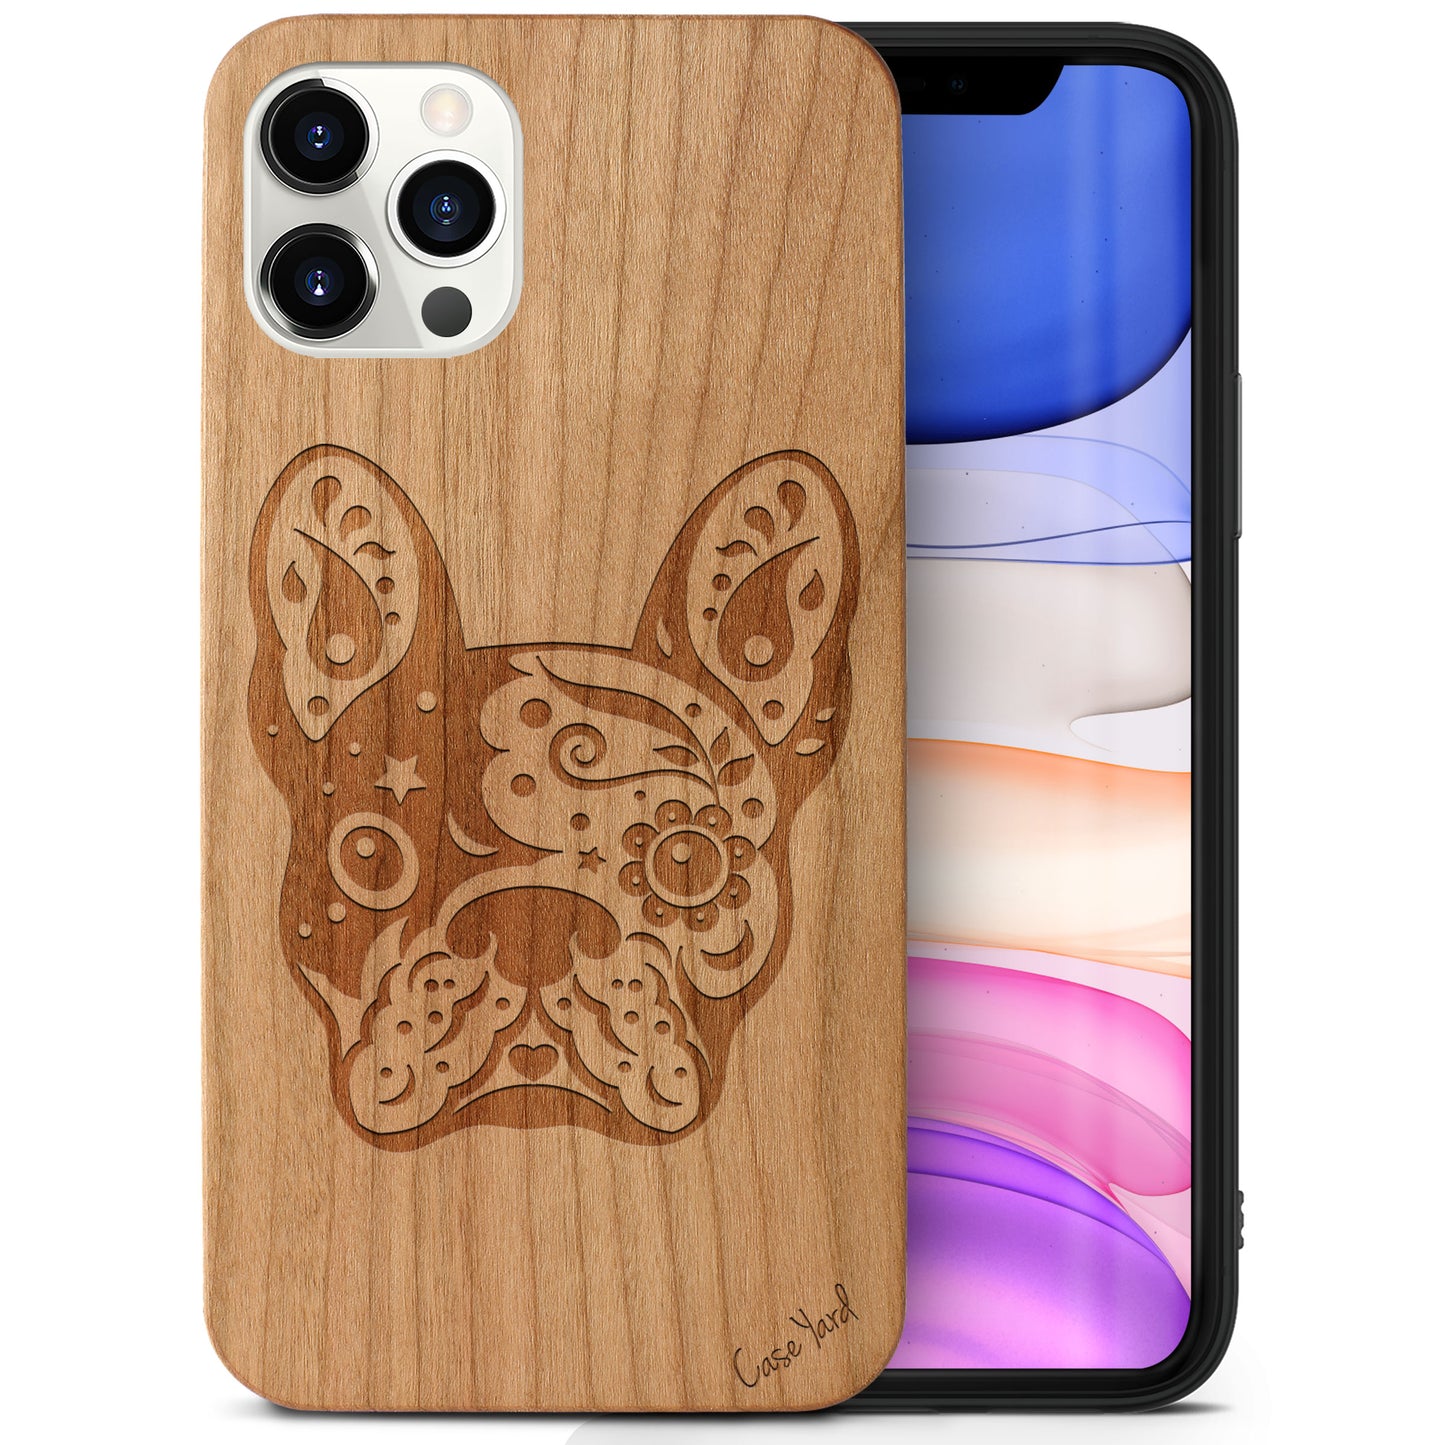 Wooden Cell Phone Case Cover, Laser Engraved case for iPhone & Samsung phone Bulldog Design